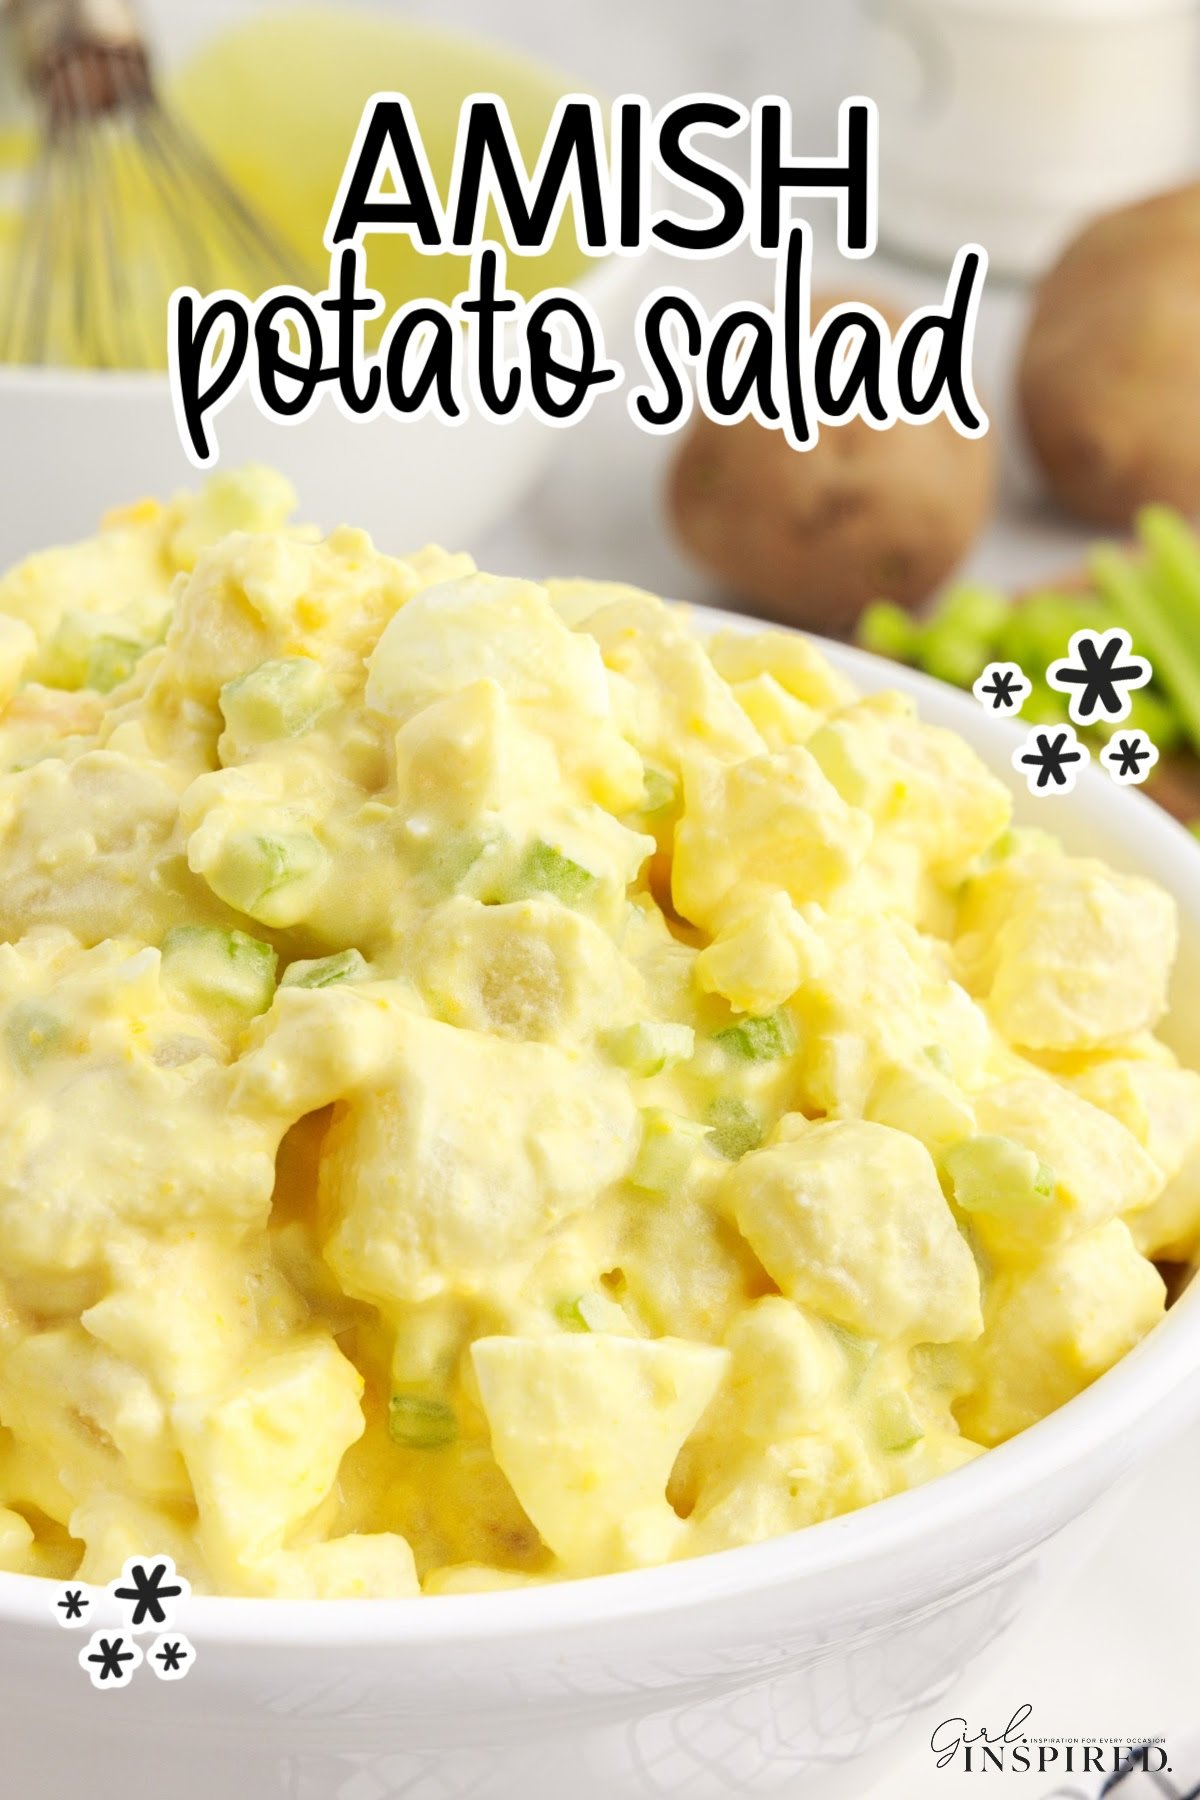 Amish Potato Salad in a serving dish with text overlay.